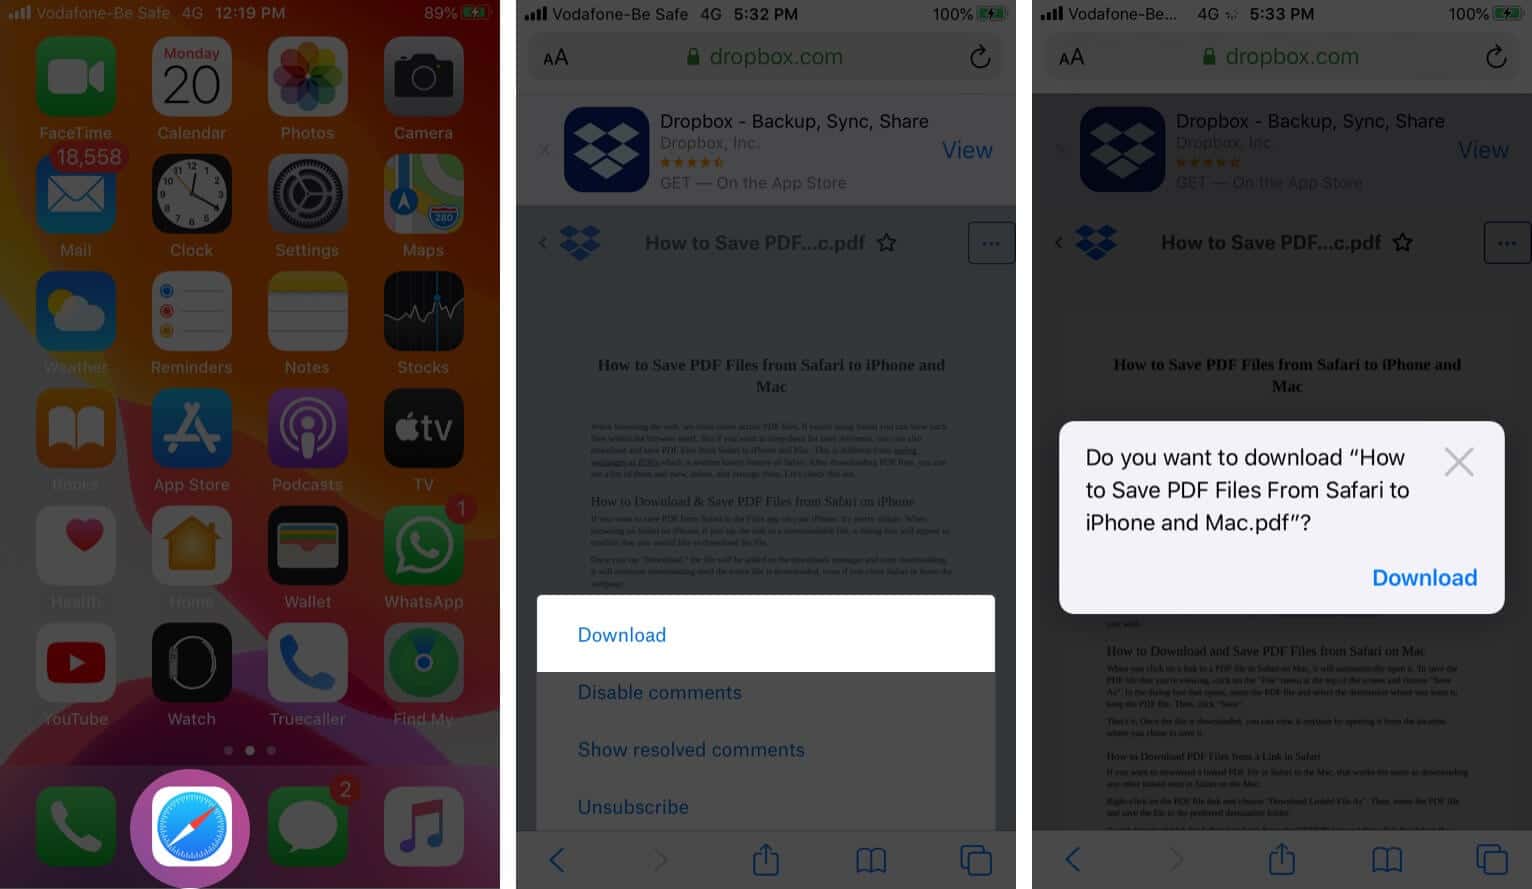 Download & Save PDF Files from Safari to iPhone